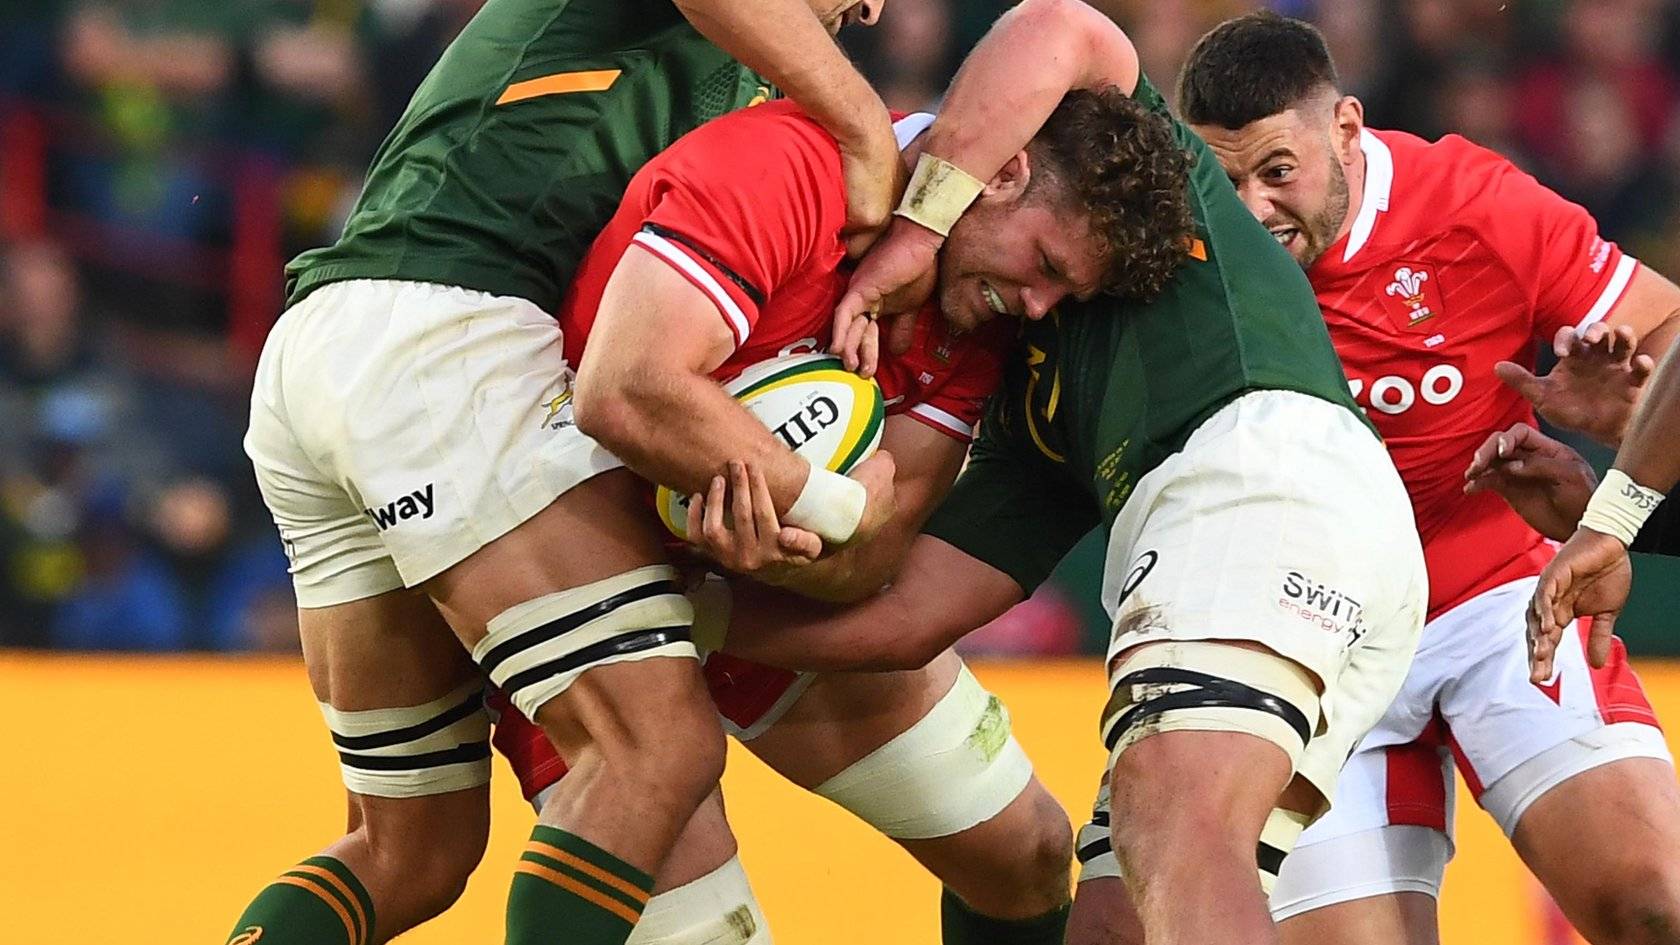 South Africa v Wales LIVE, first Test score, commentary & updates